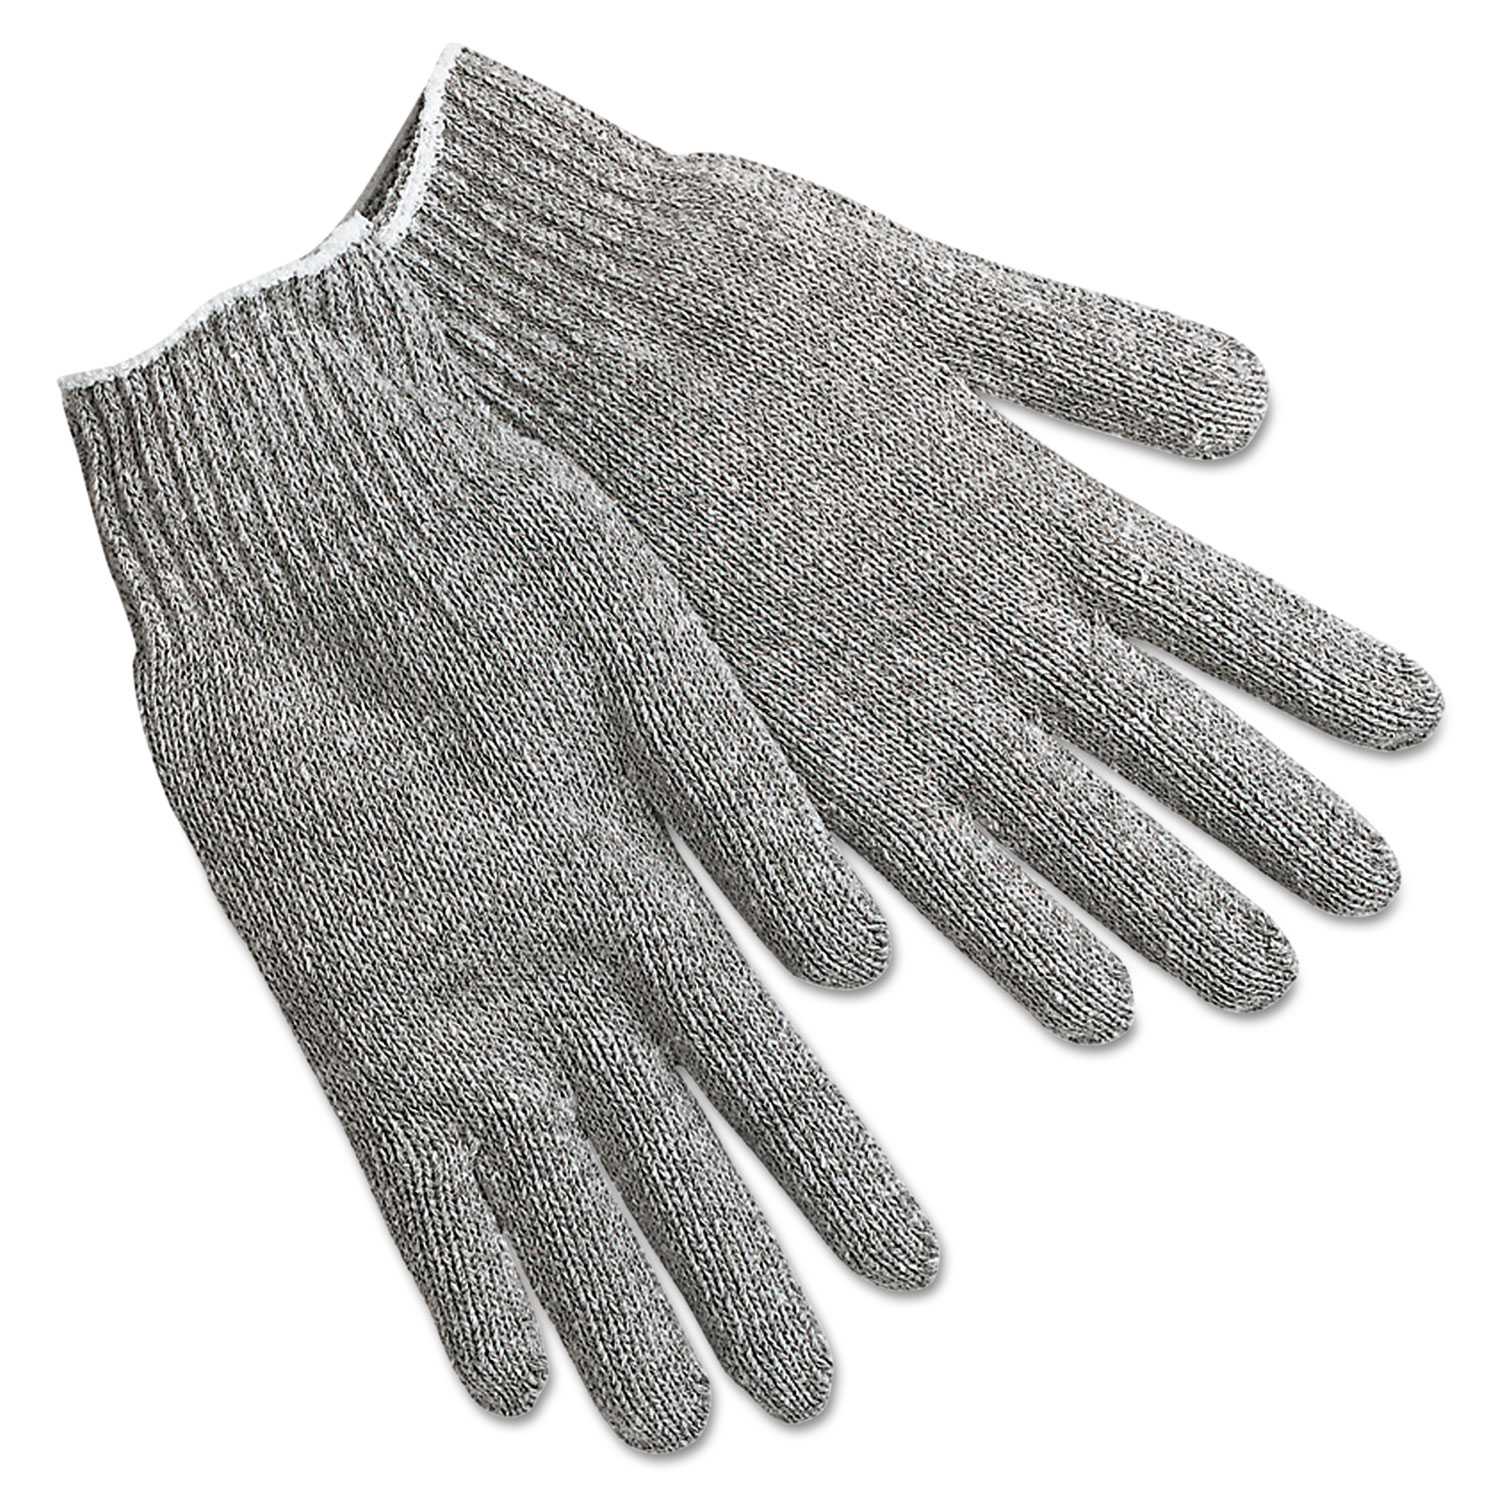 String Knit Gloves, Gray Cotton/Polyester, Large